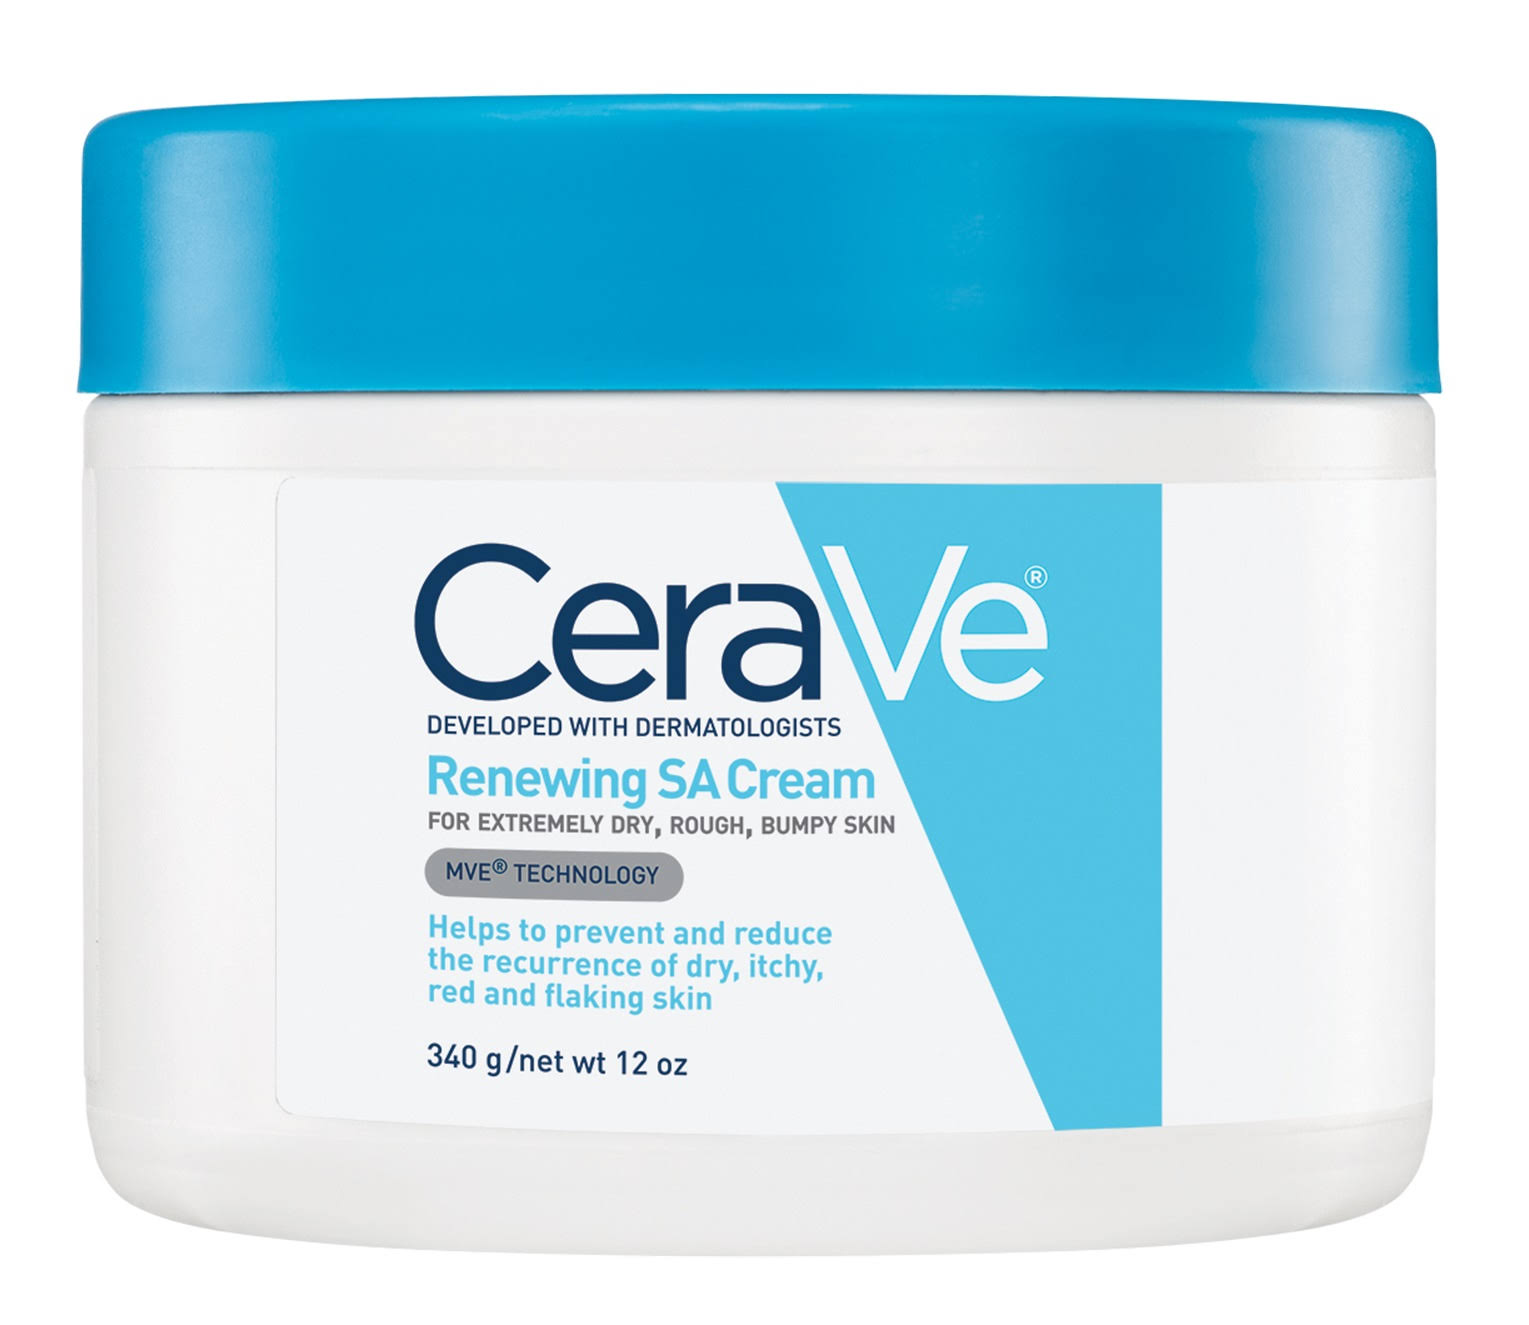 Cerave Salicylic Acid Cream for Rough and Bumpy Skin 340g